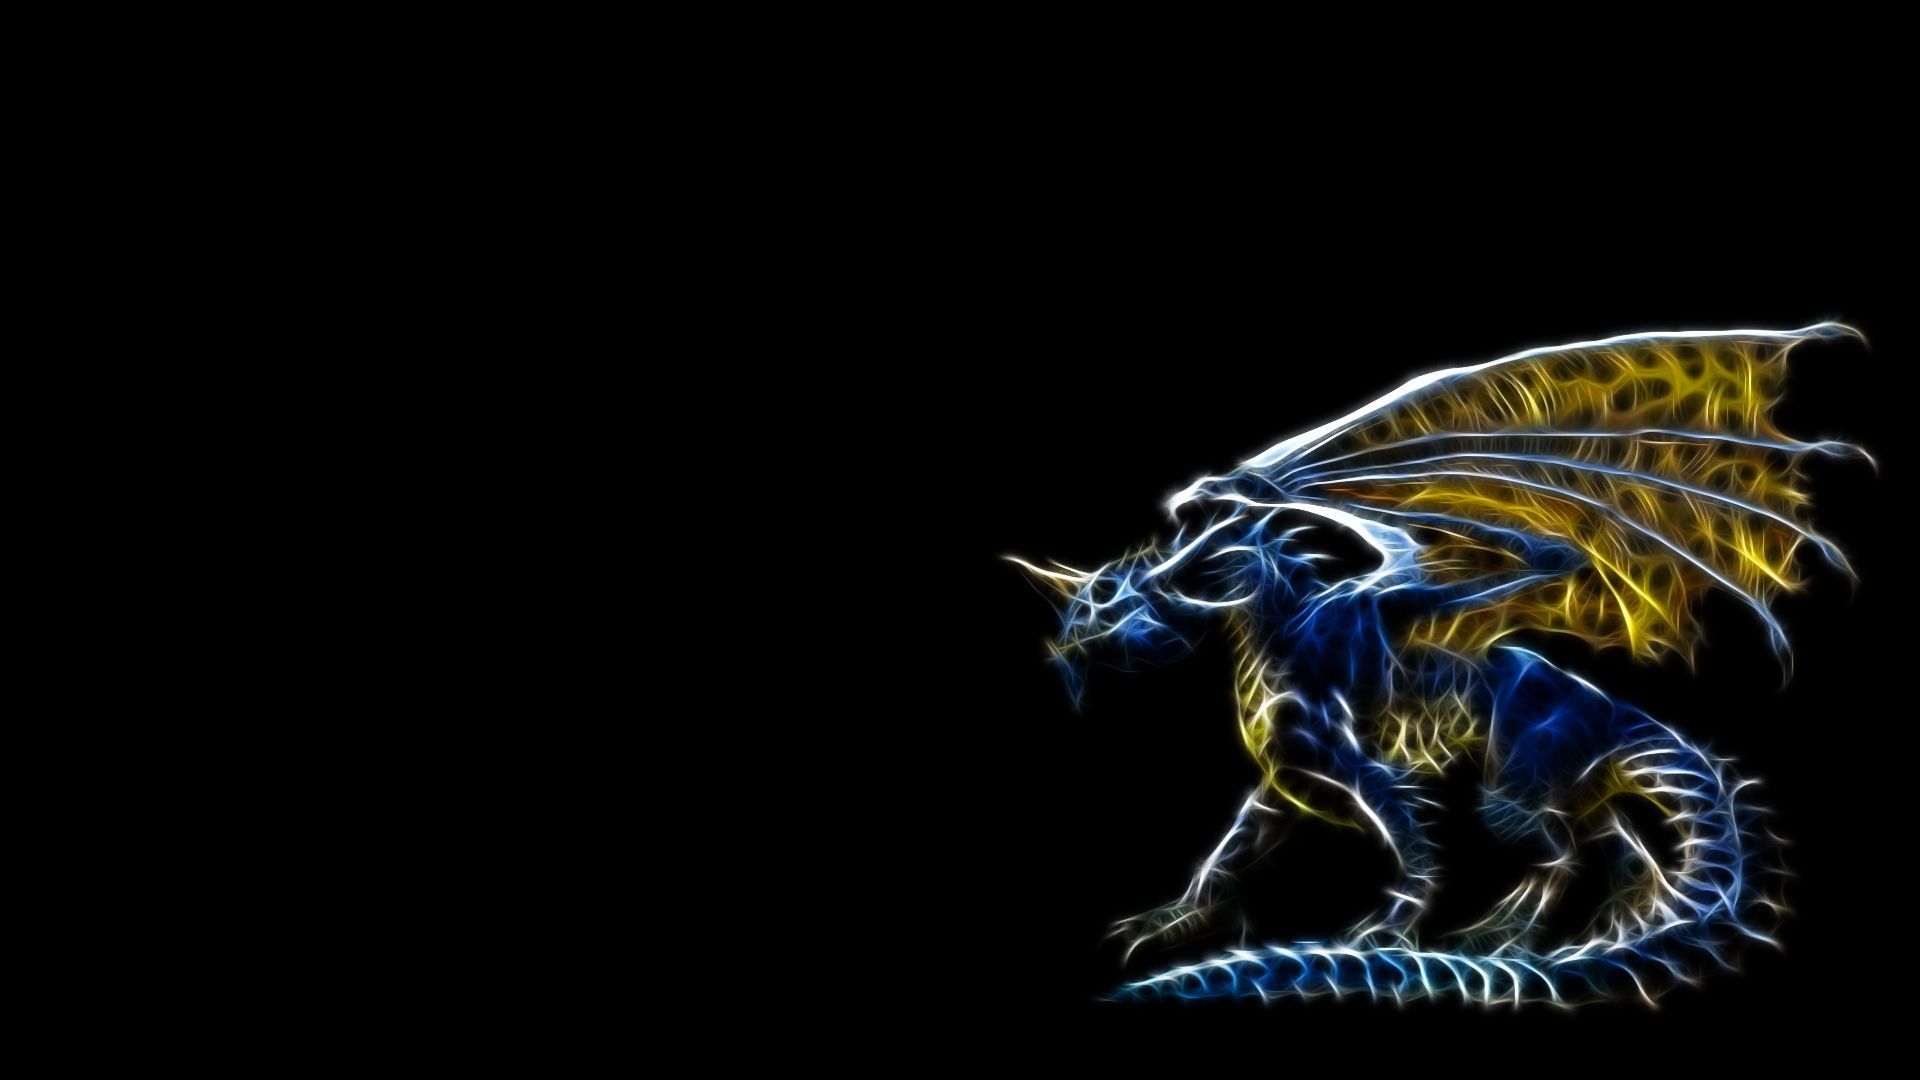 Top Blue Dragon Hd Images for Pinterest